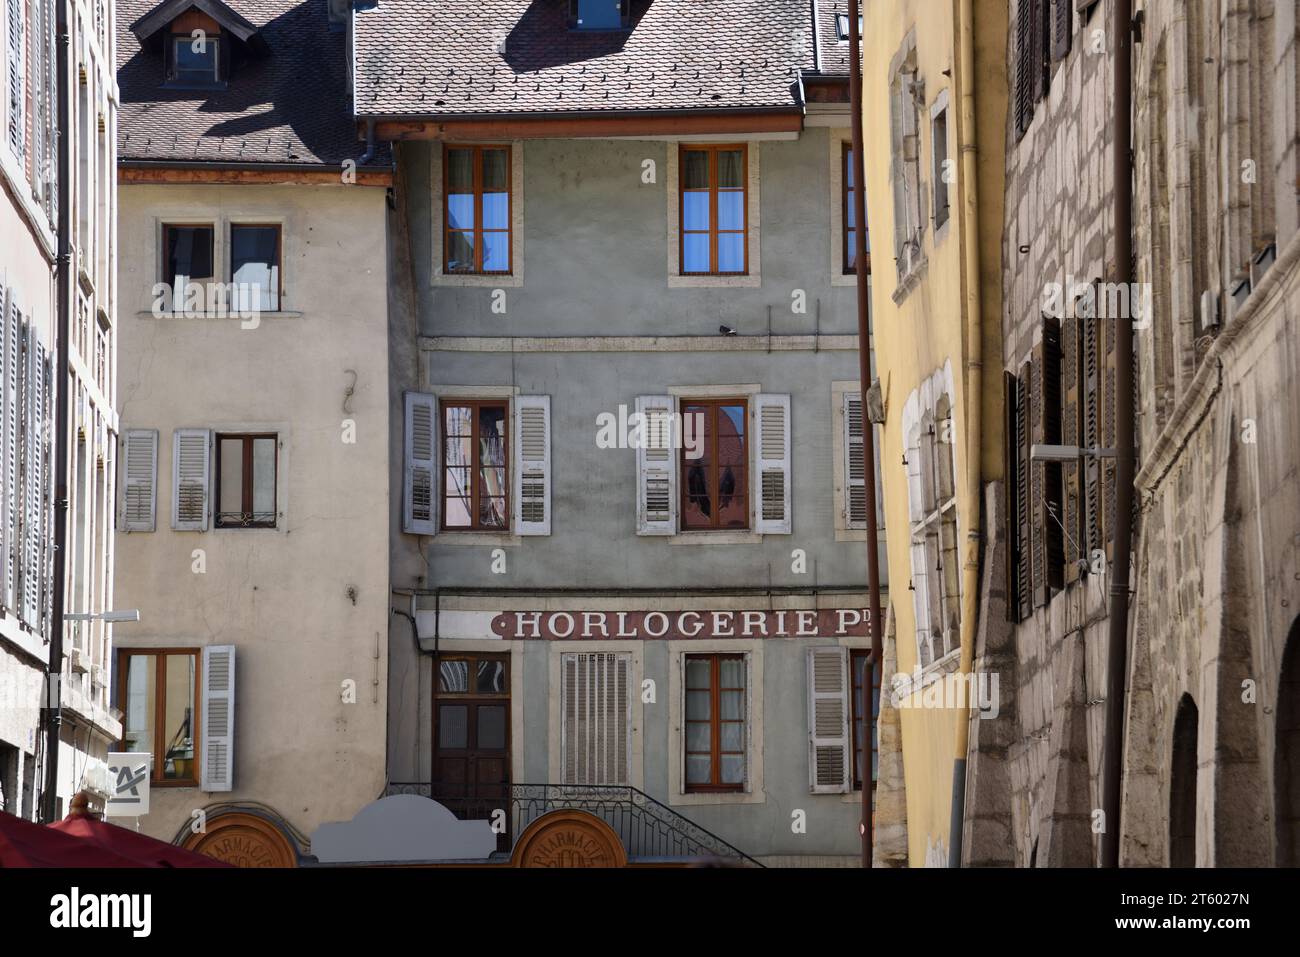 Old Painted Facades including Horlogerie & Old Buildings in the Old Town or Historic District Annecy Haute Savoie France Stock Photo